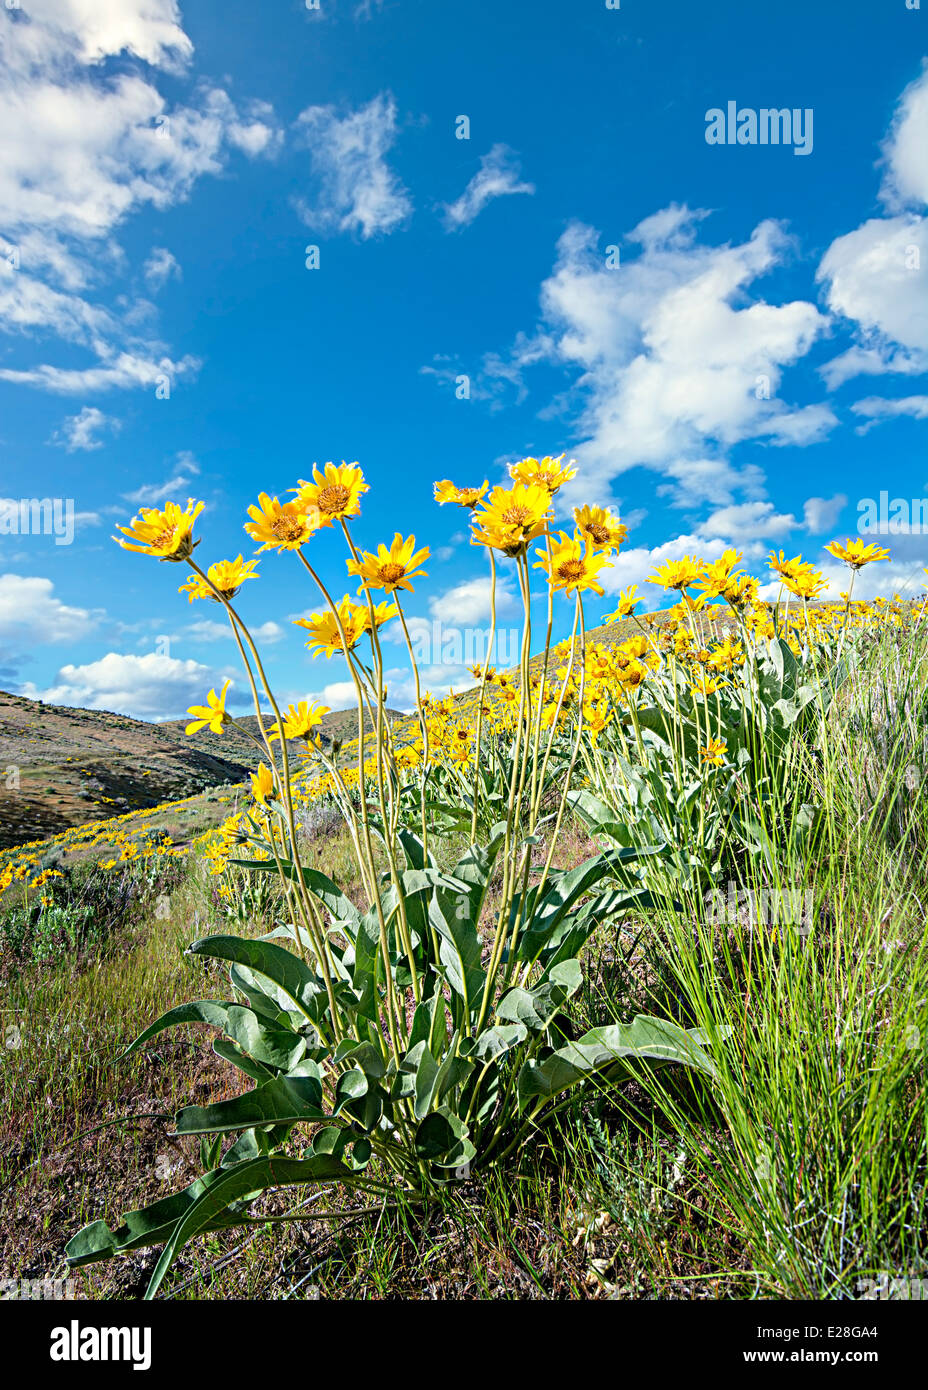 Yellow spring flowers against a blue sky with clouds Stock Photo